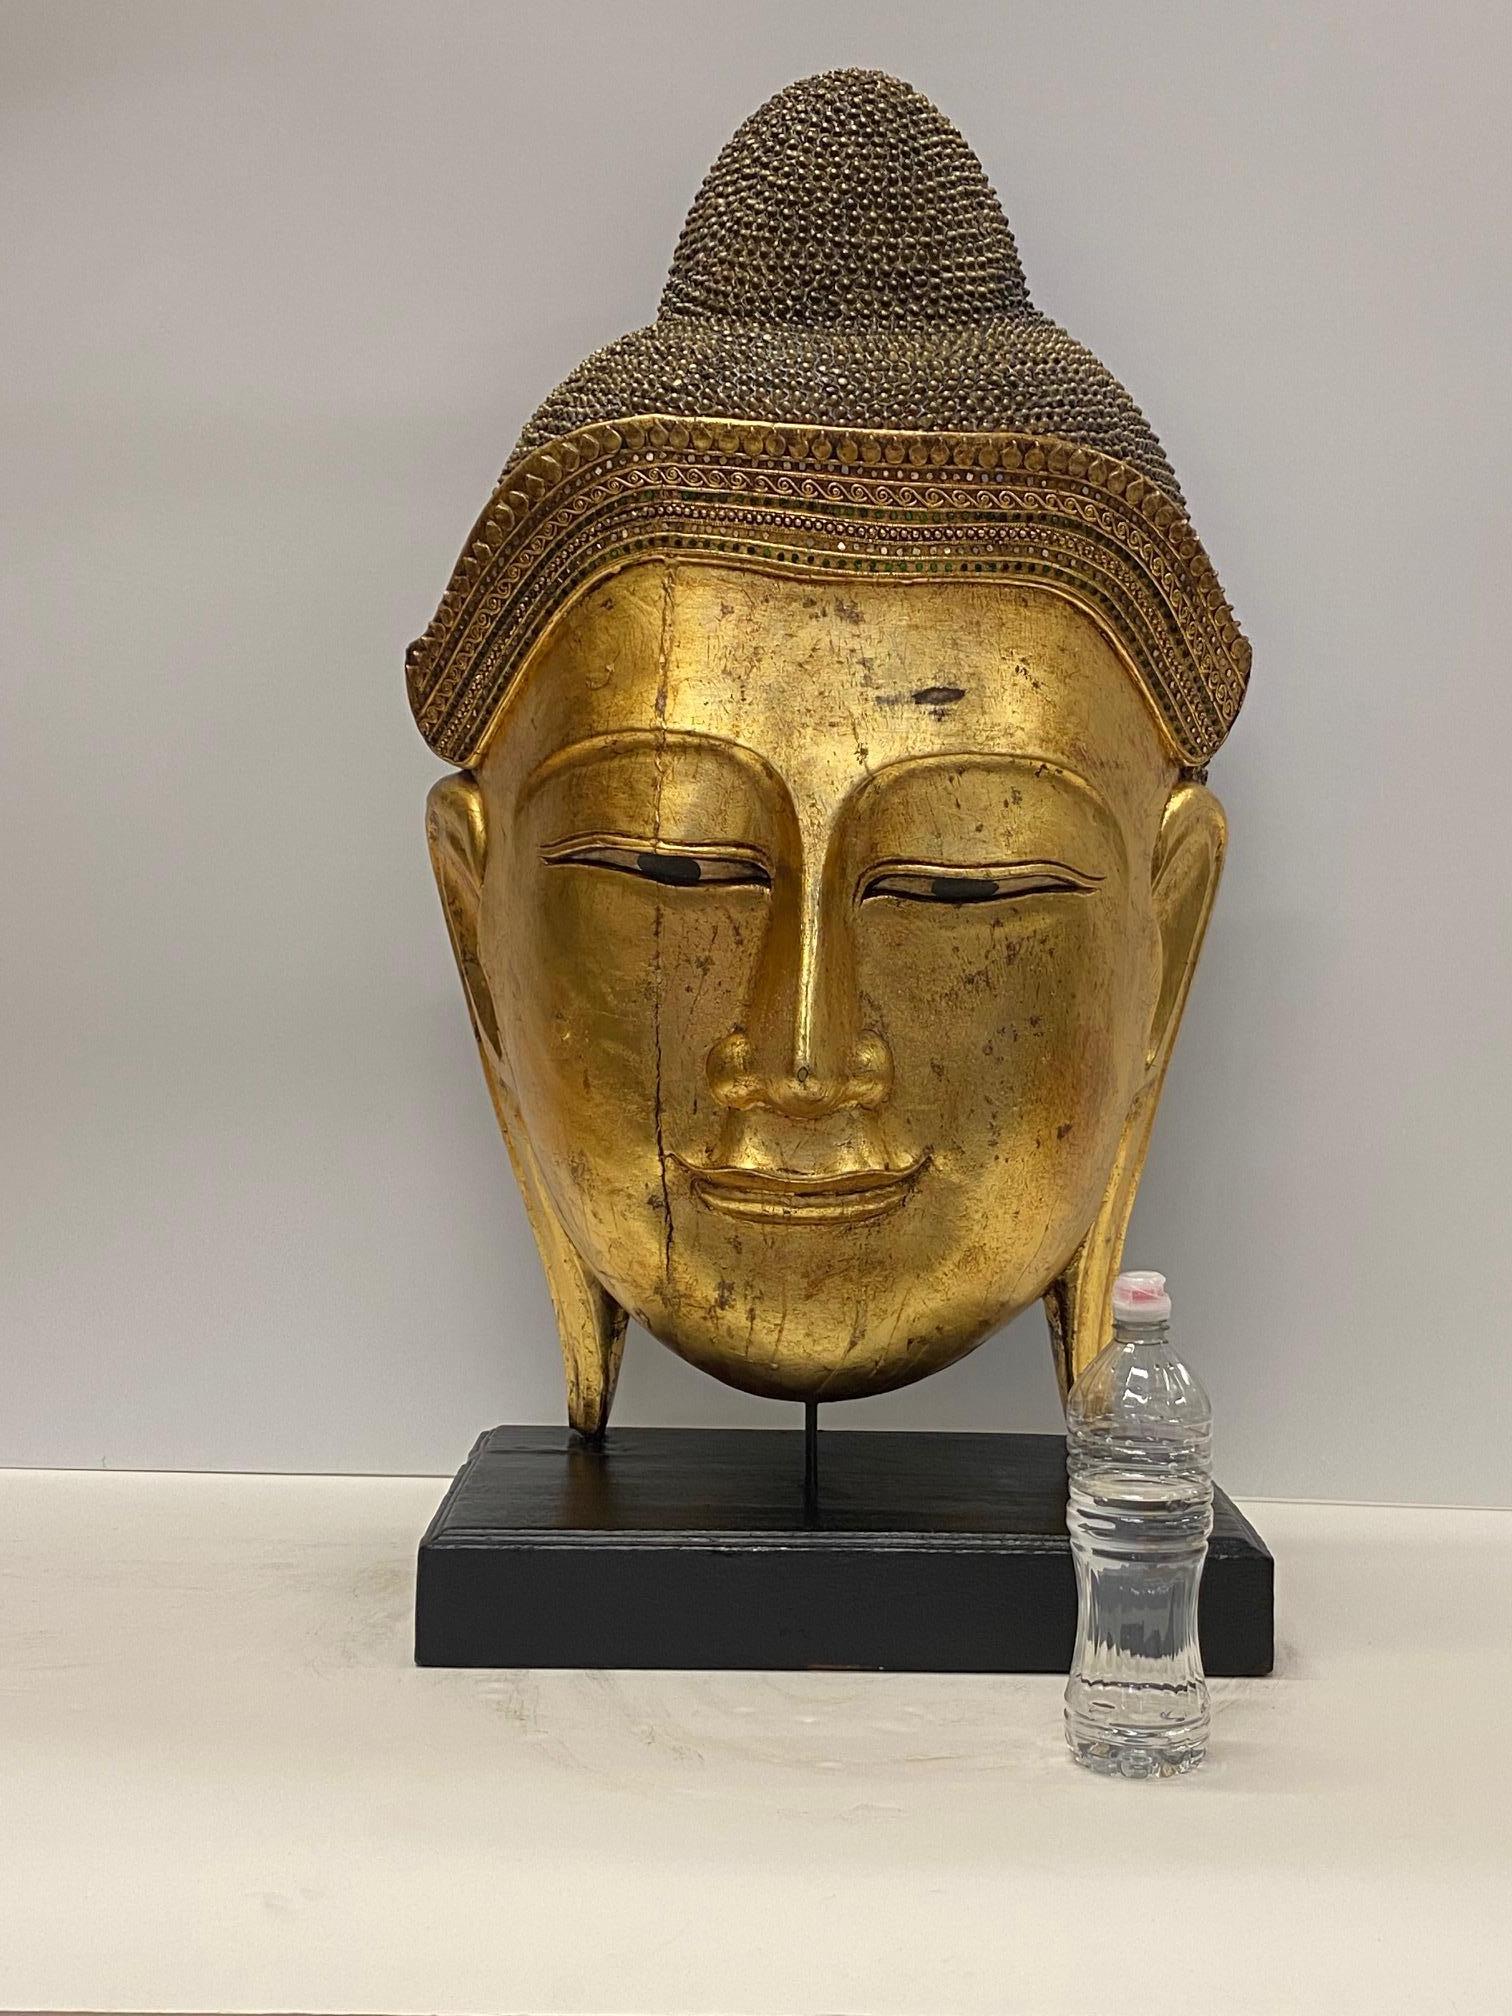 Impressively large gilded carved hardwood Thai Buddha head having gold leaf and meticulously detailed decoration with inset jewels. Beautiful serene expression and simple black base.